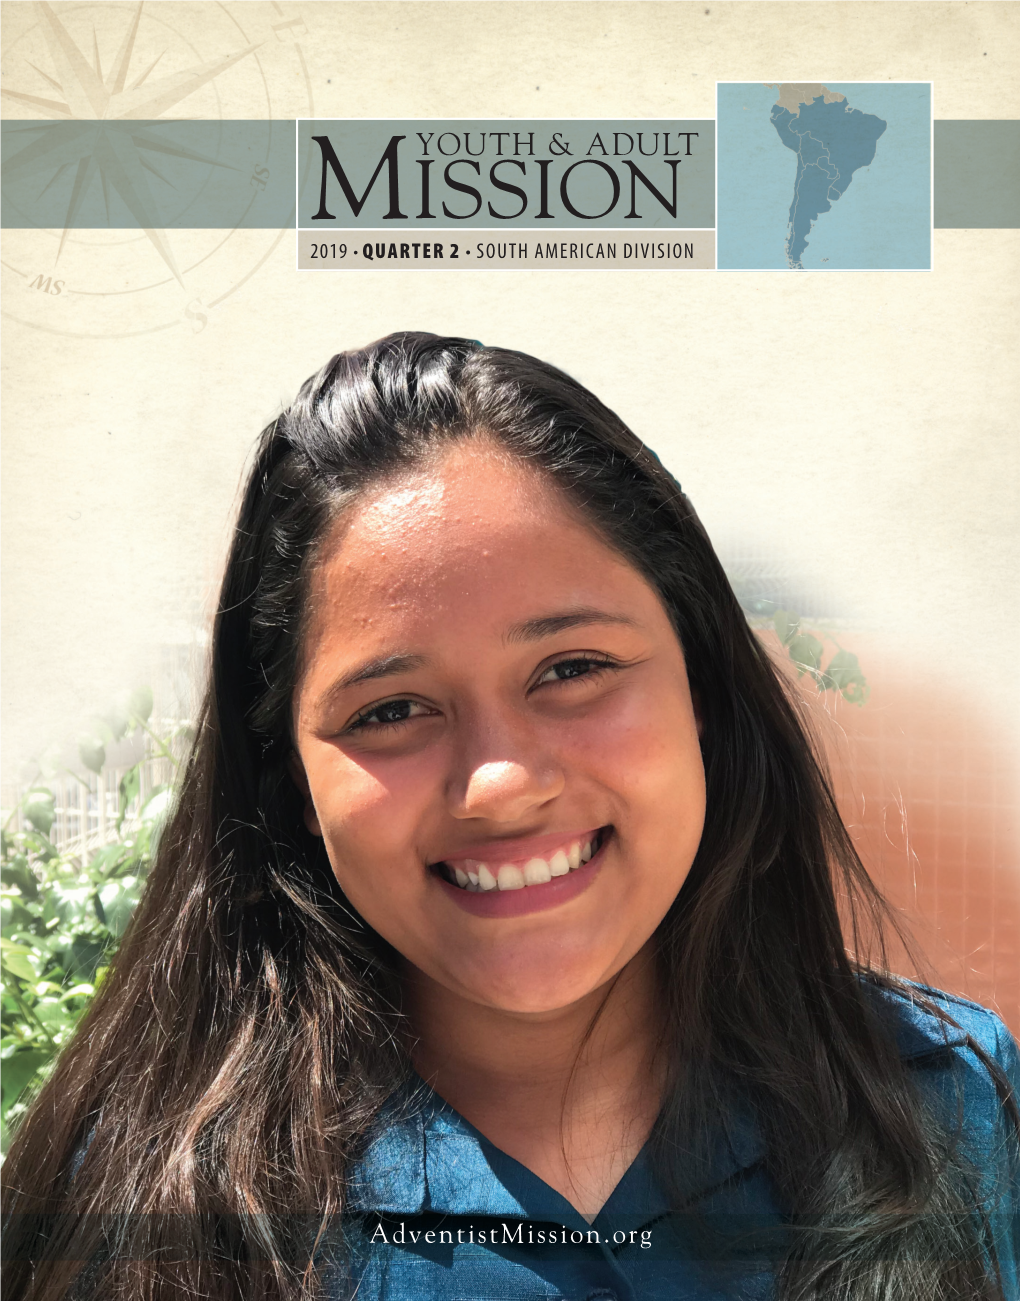 Adventist Mission South American Division Bible-Carrying City Folk City Bible-Carrying Coming, Hisheart Filledwithjoy